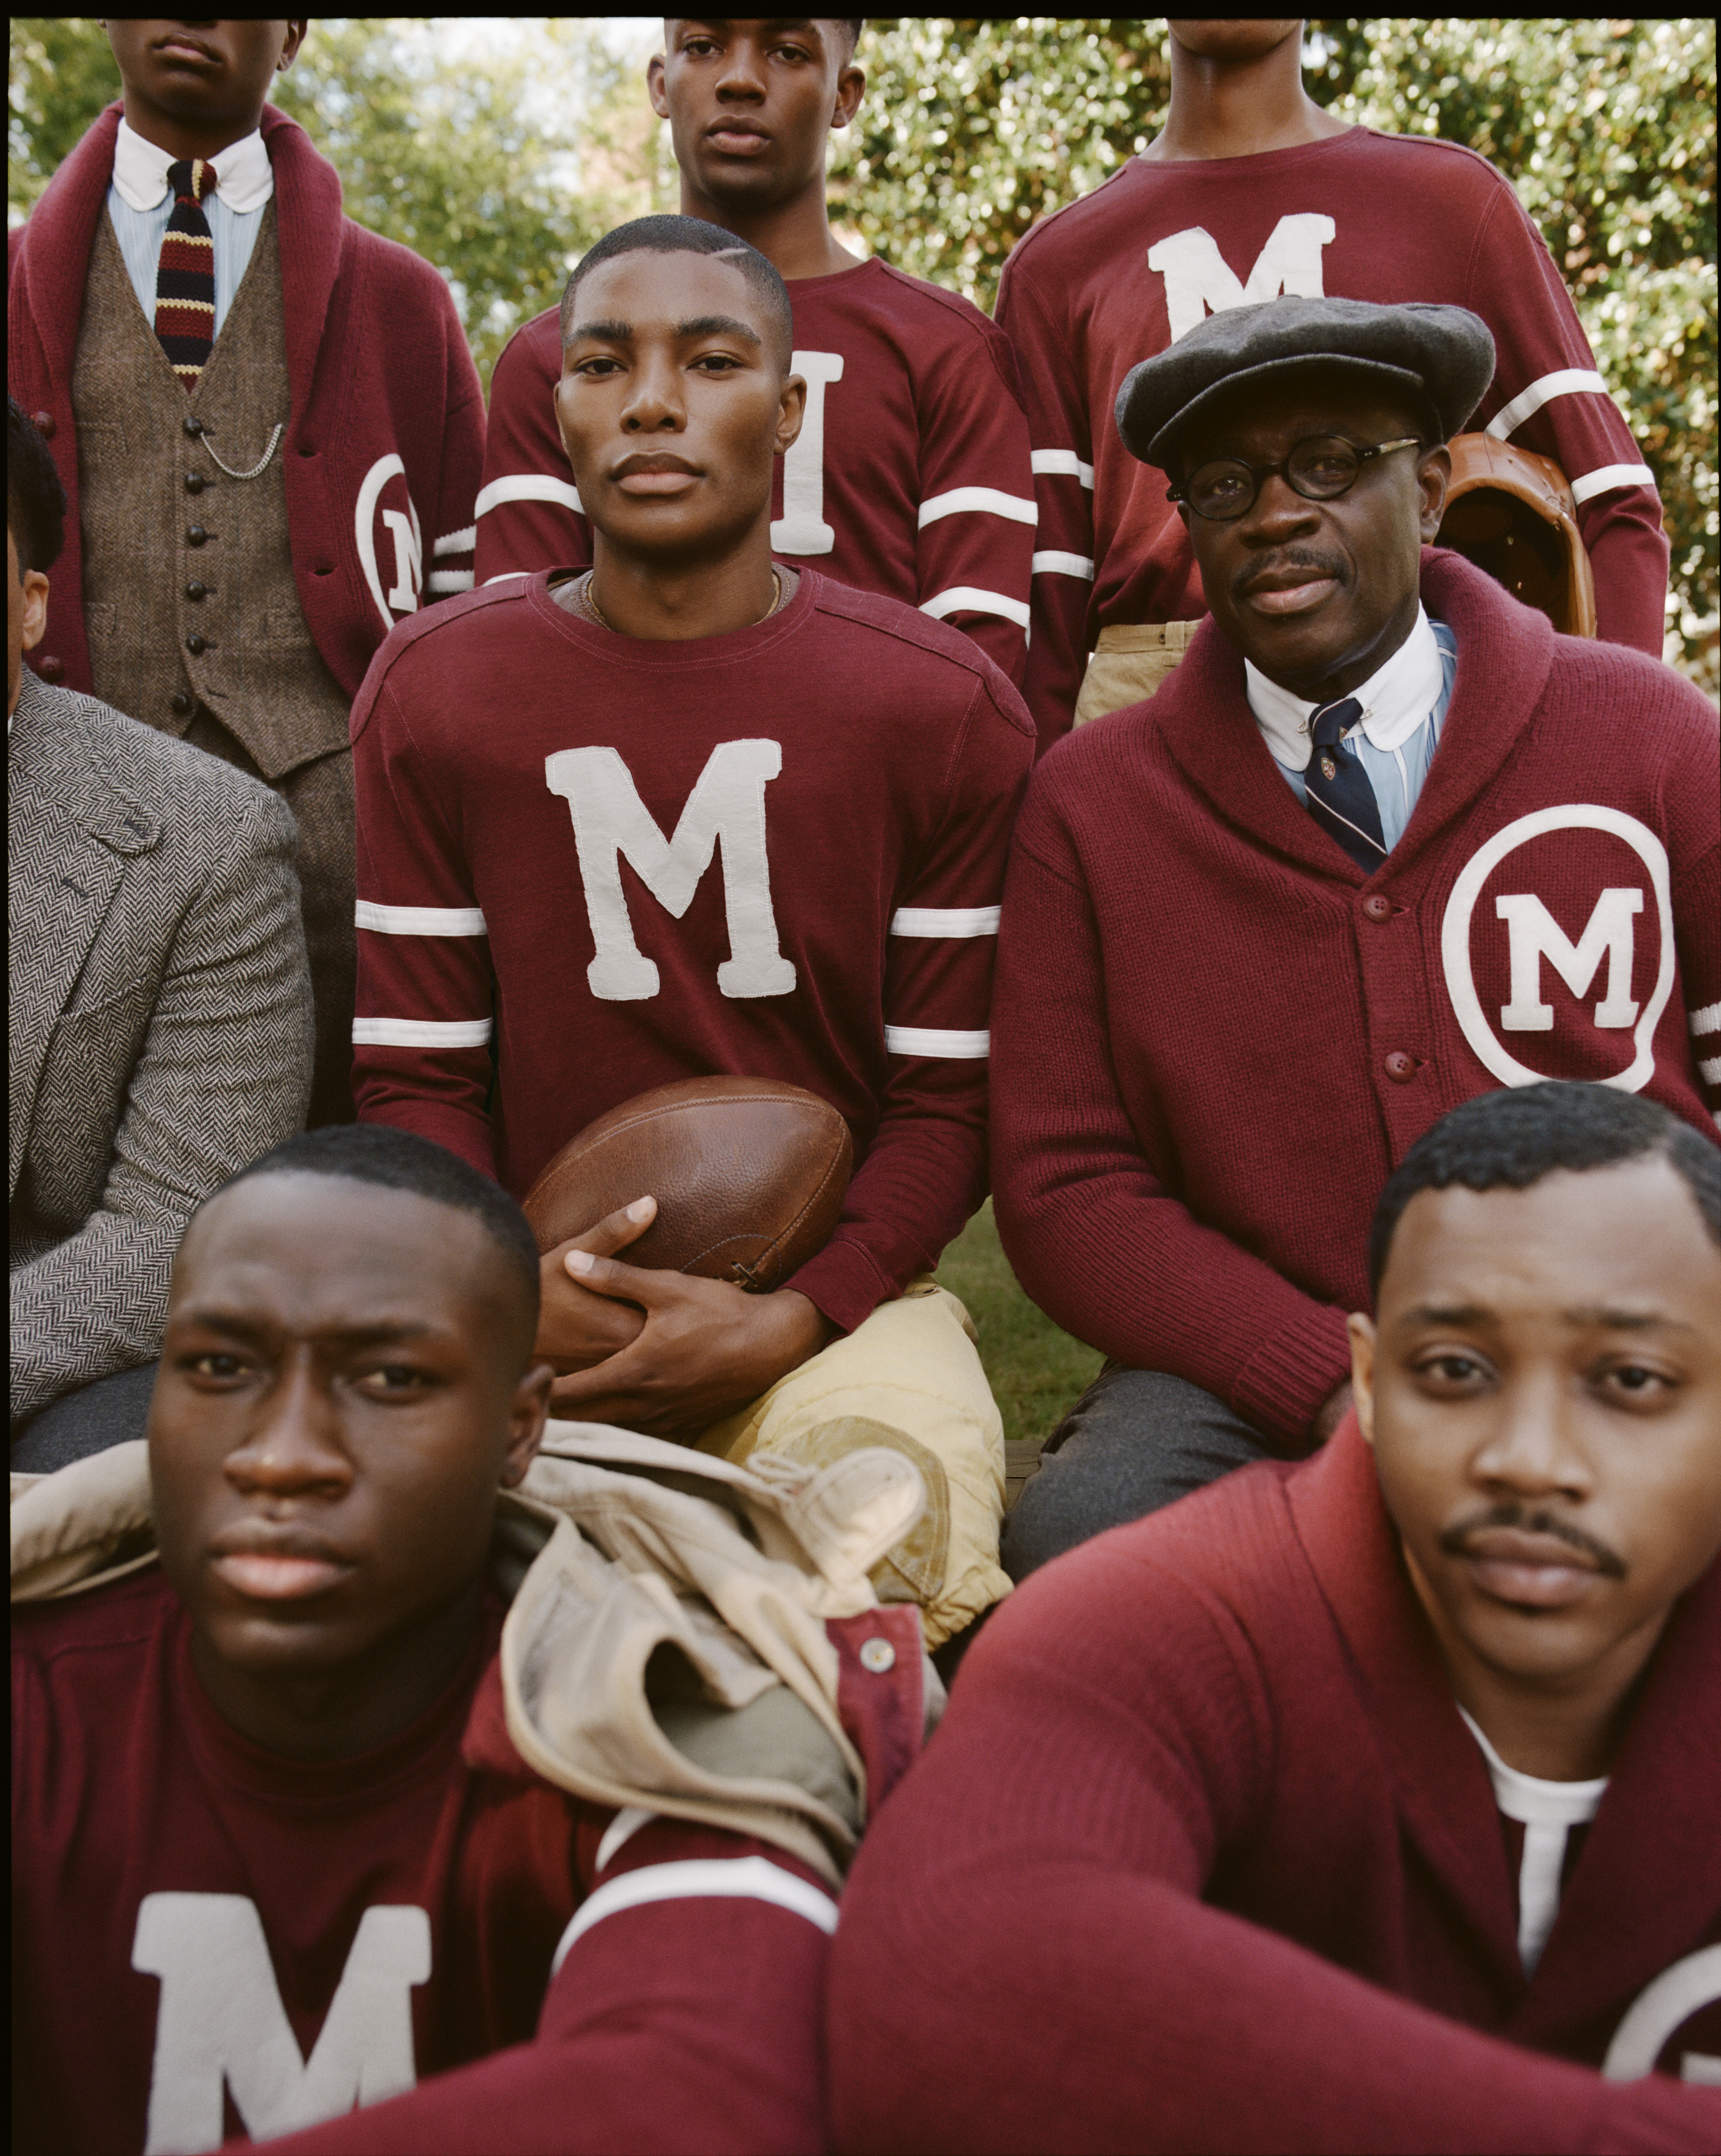 Ralph Lauren Unveils Collection for HBCUs Morehouse and Spelman | BoF